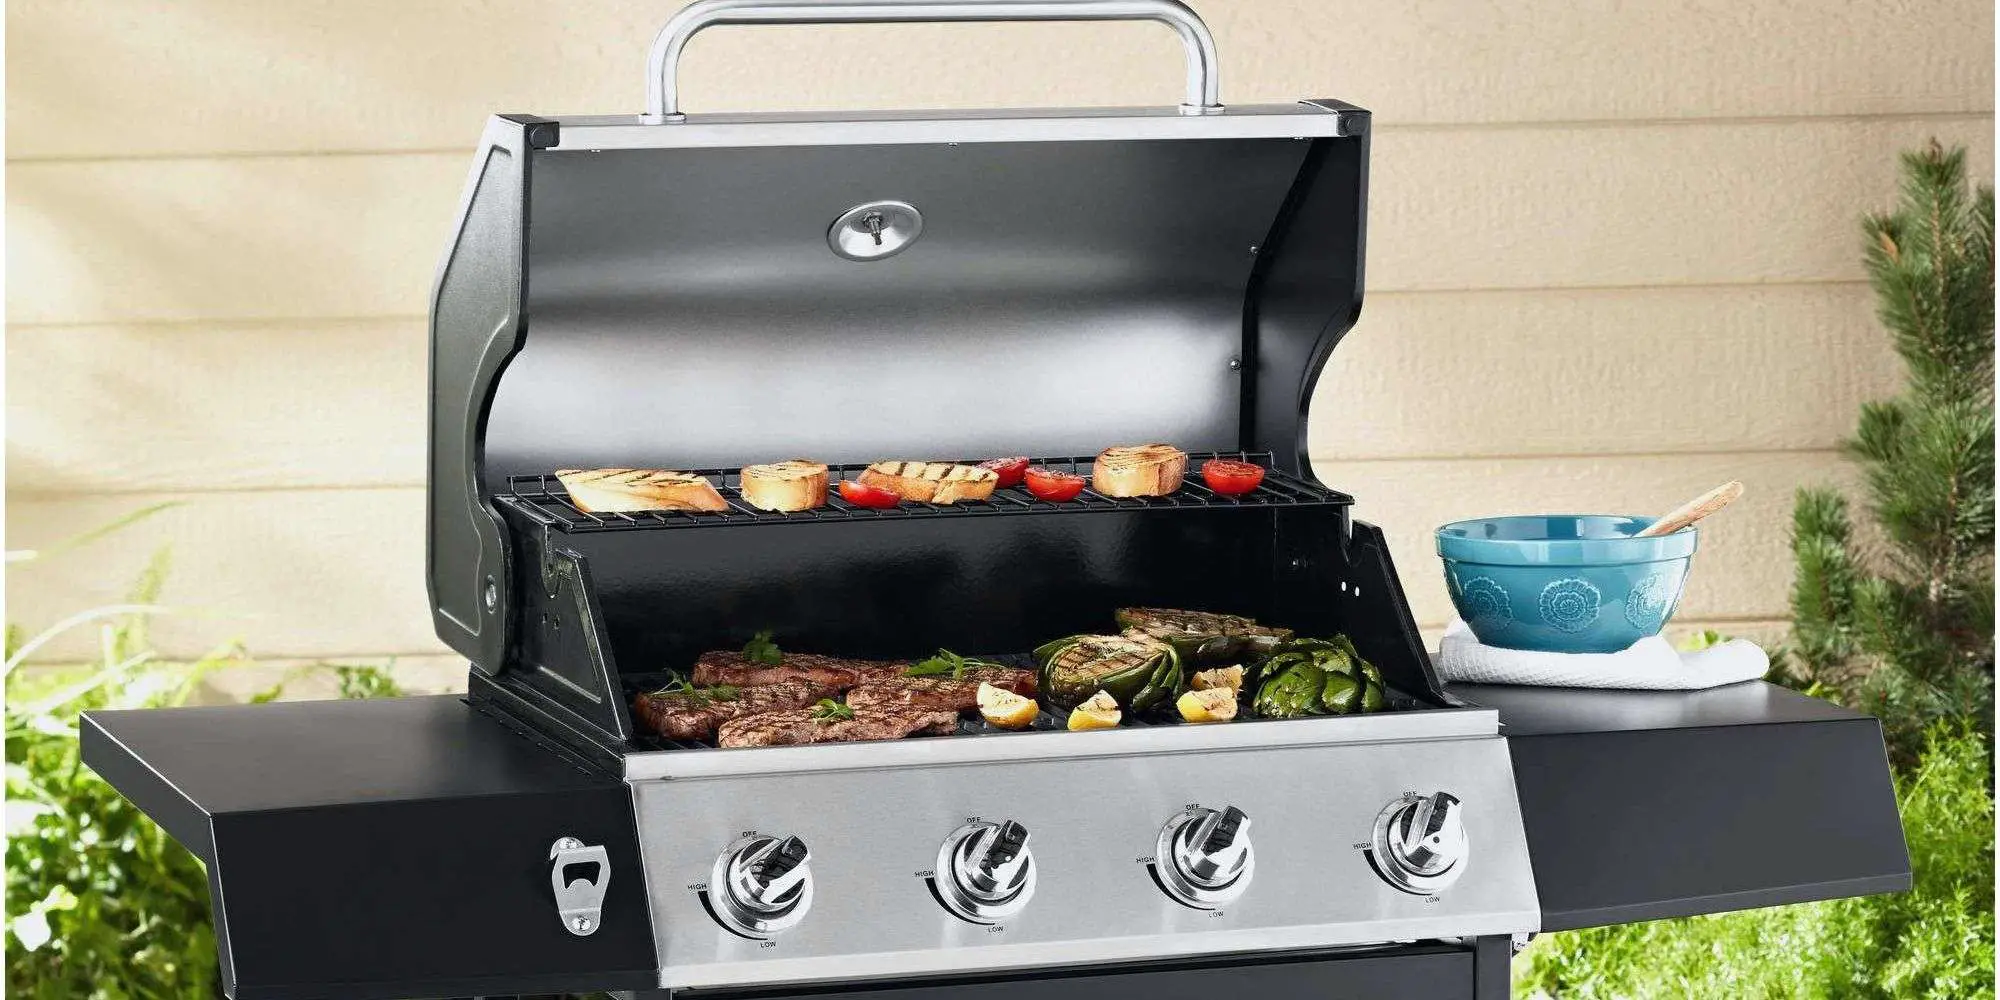 When it comes to grills, you get what you pay for